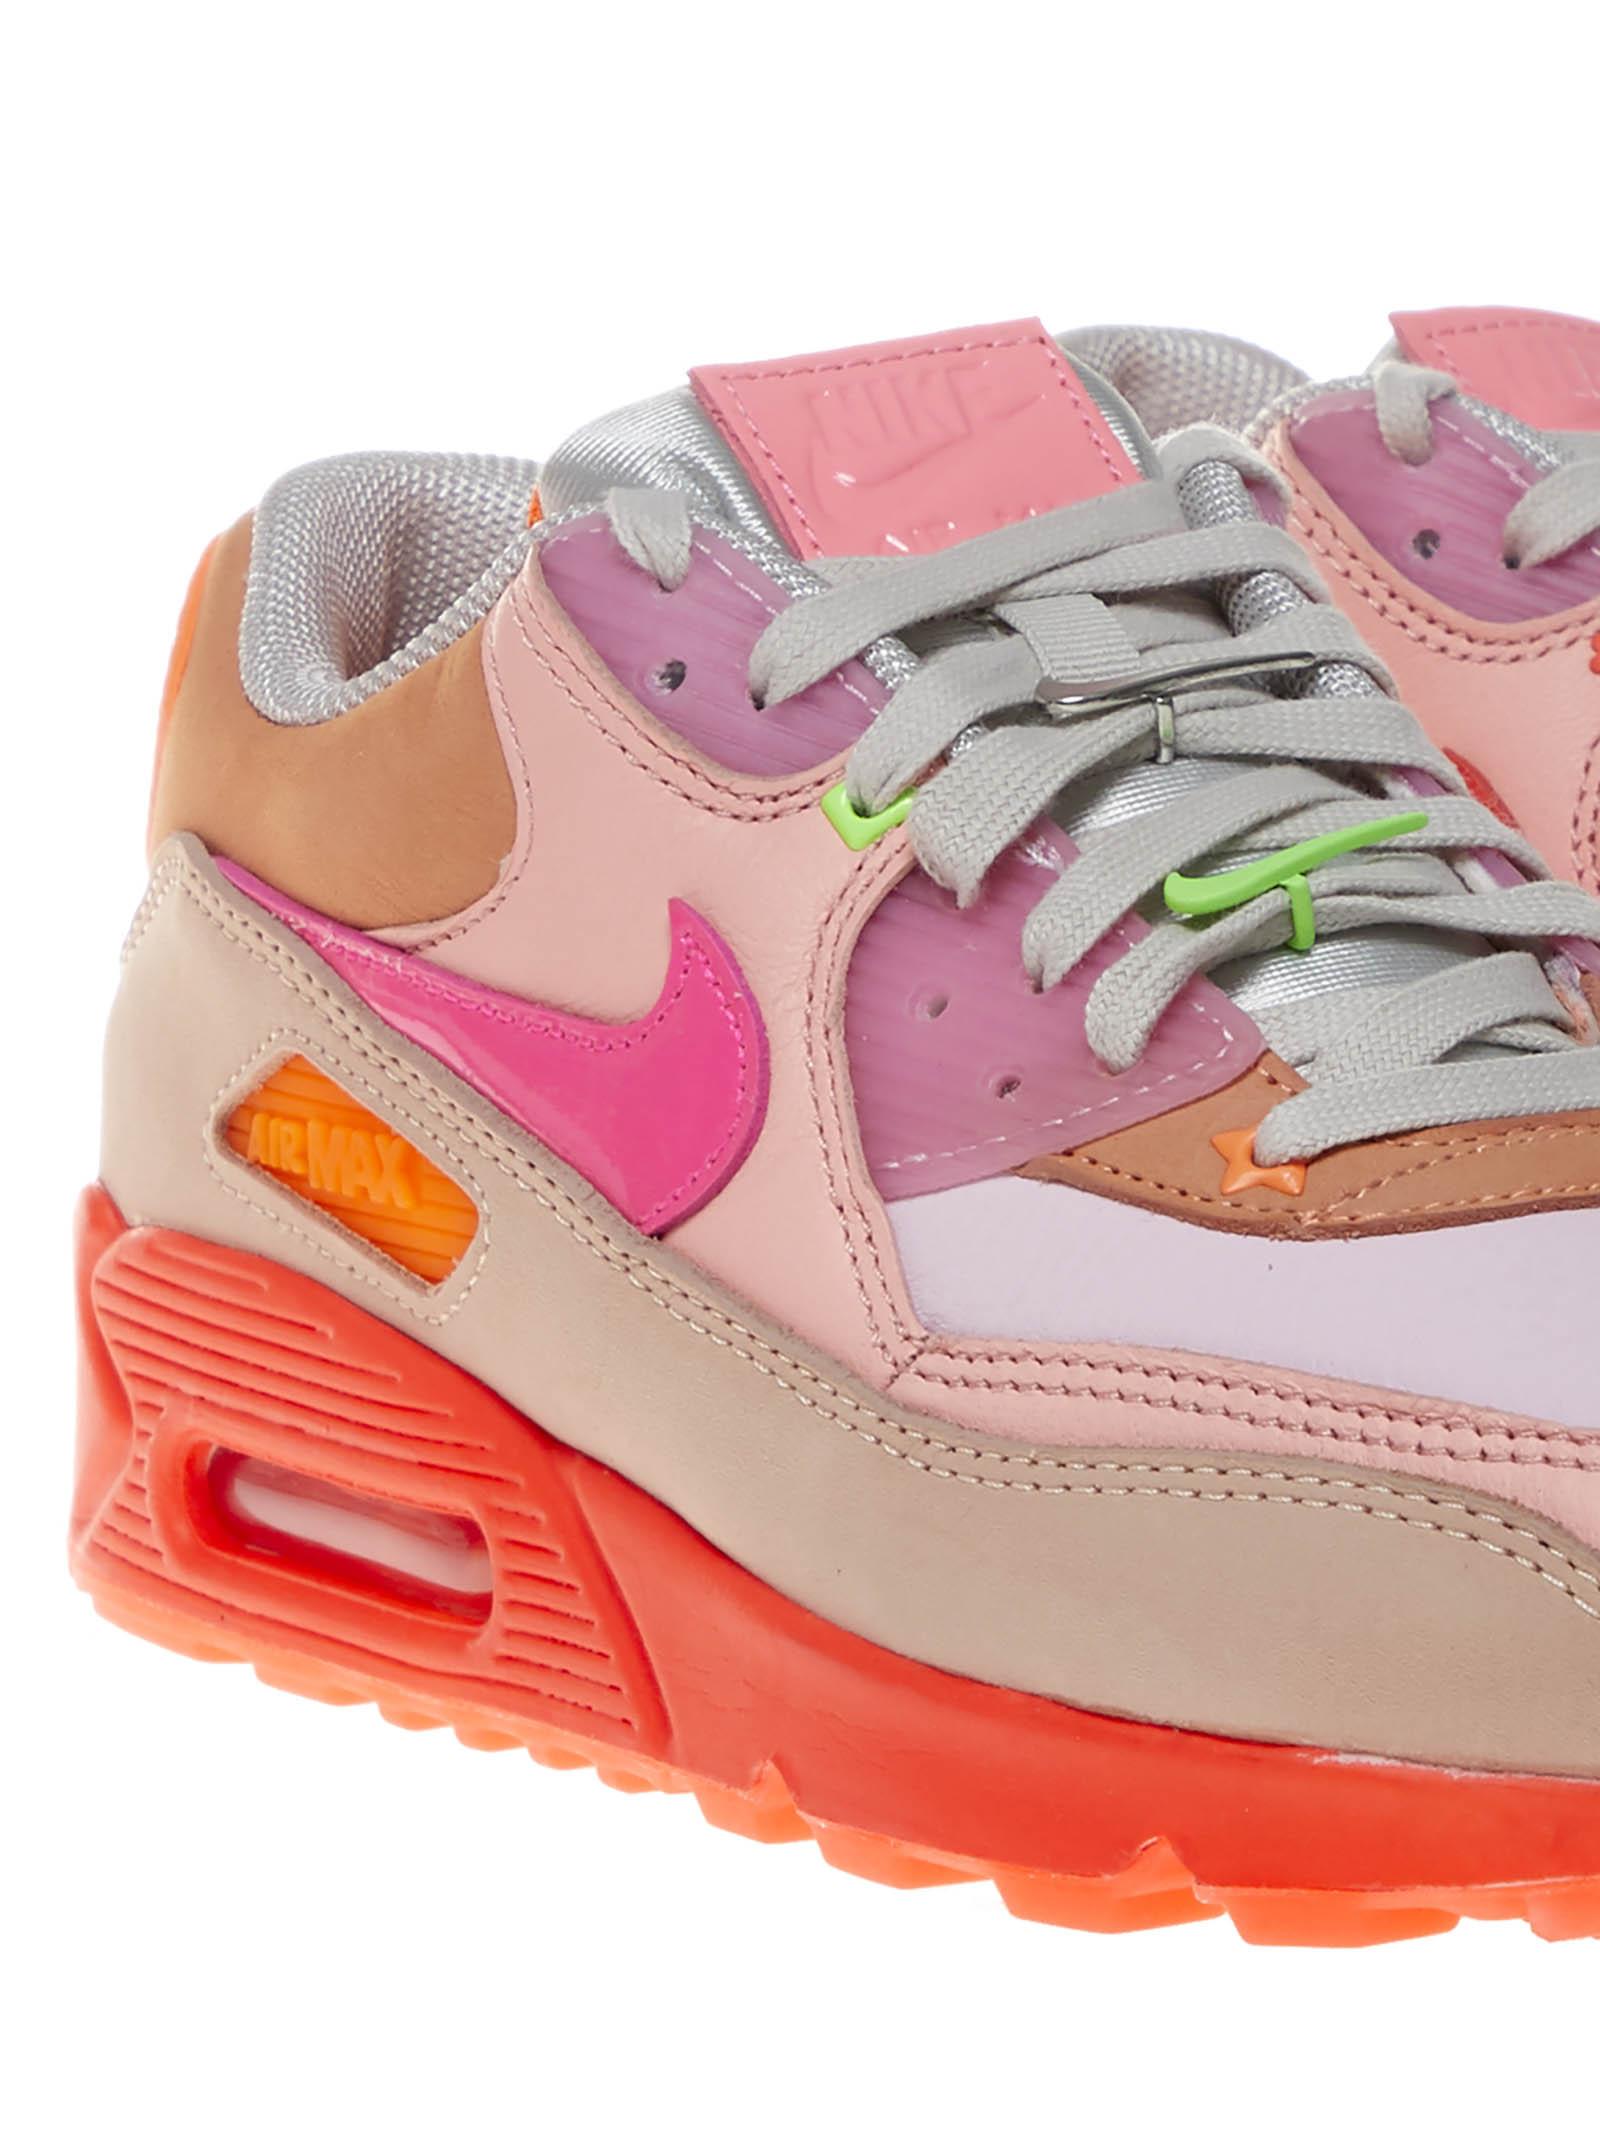 Nike Leather Pink And Orange Air Max 90 Sneakers With Layered Design And  Integrated Air Technology. | Lyst